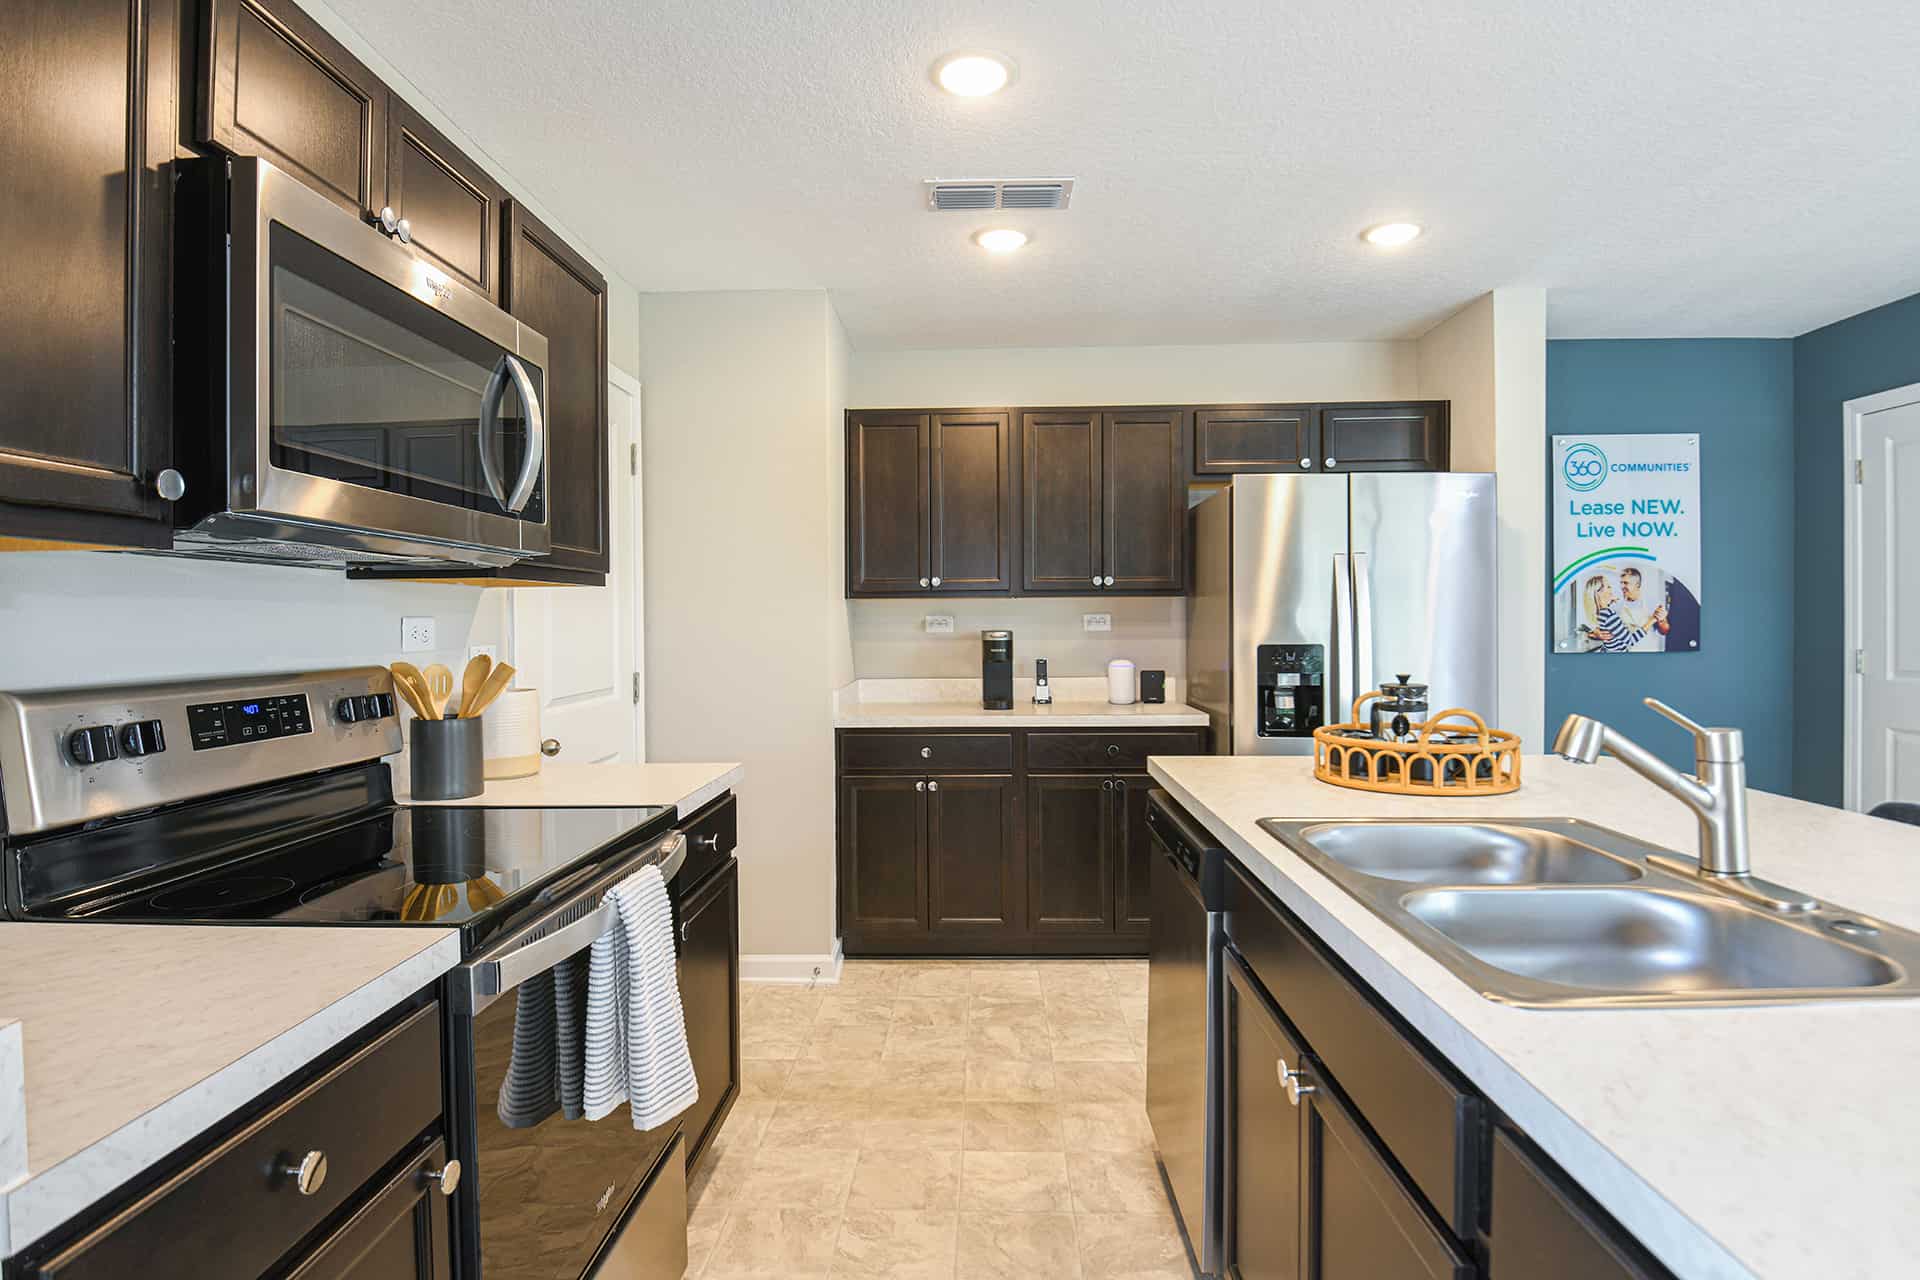 Townhouses for Rent in Jacksonville, FL - Liberty Square - Kitchen with Tile Floors, Stainless Steel Appliances, Dark Wood-Style Cabinets, Light Countertops, and a middle Island